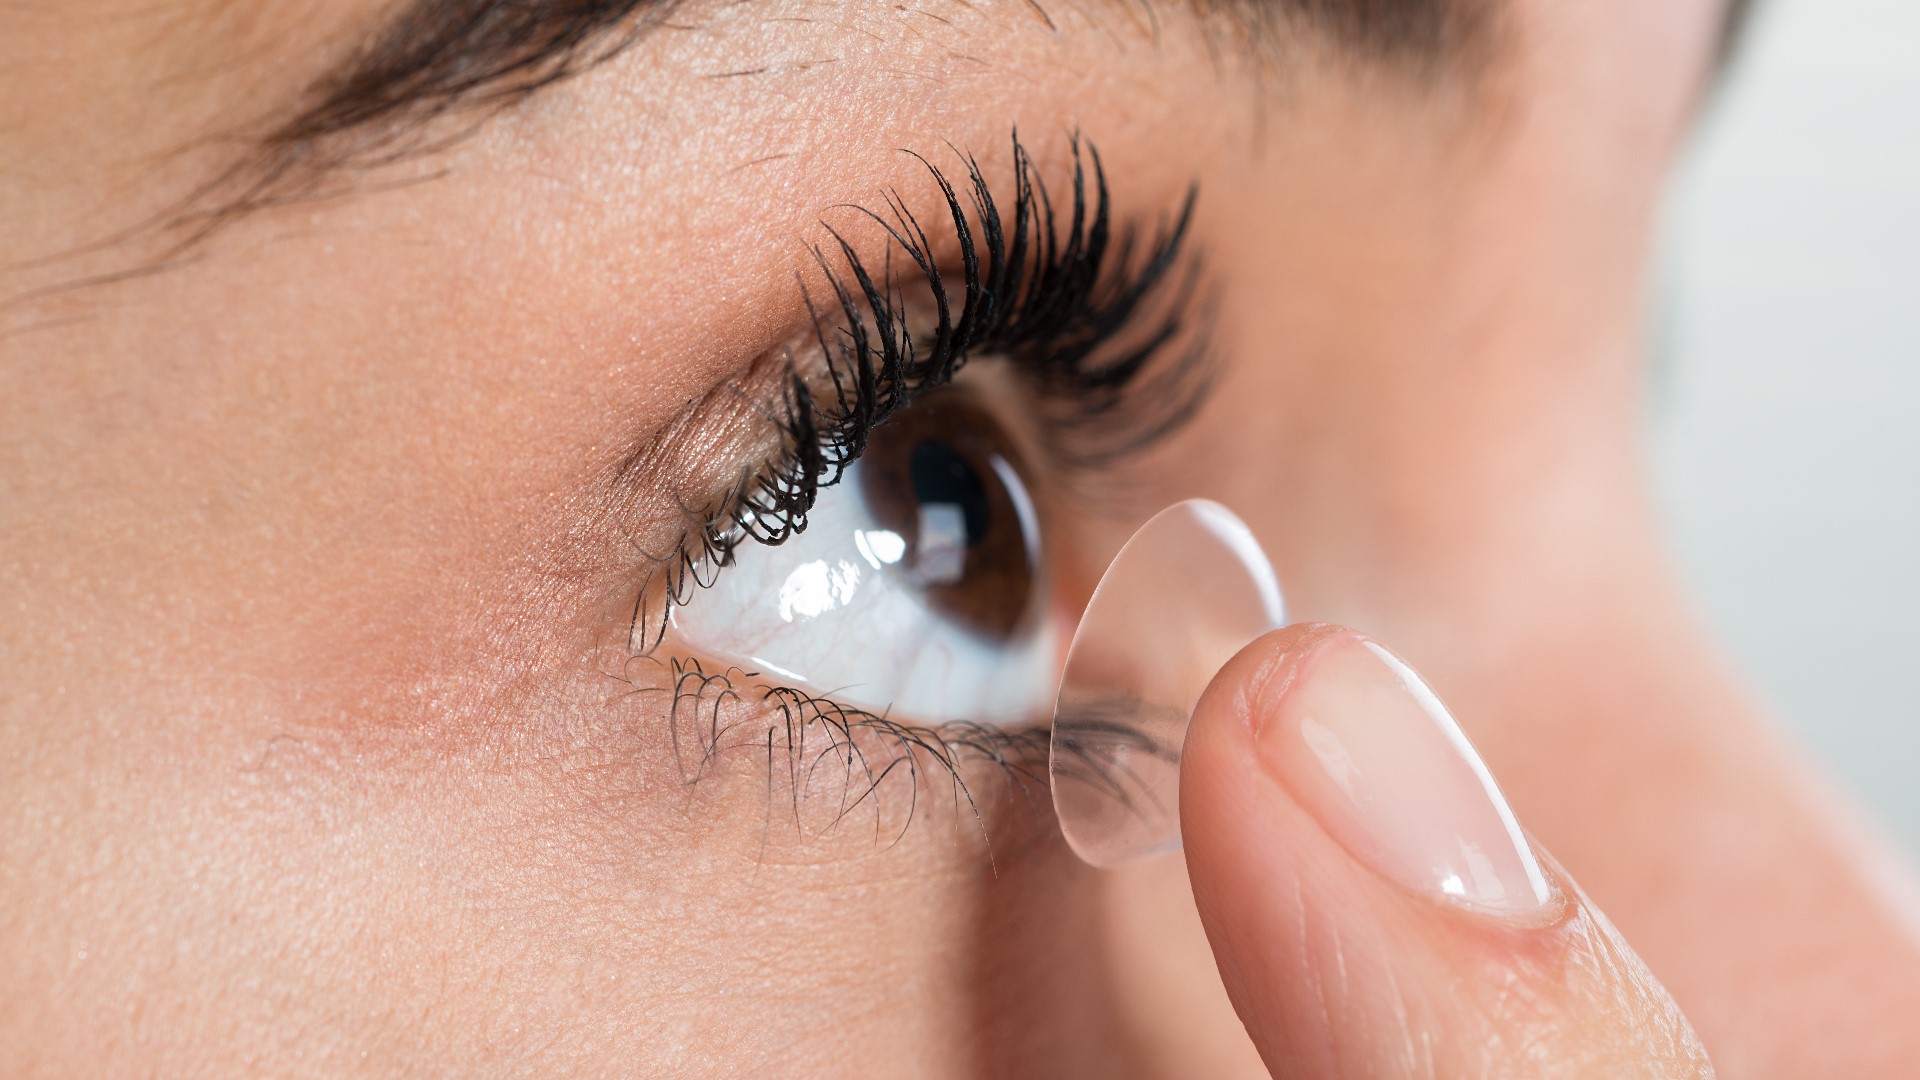 Is it true showering with your contact lenses can hurt you? Chris Rogers verifies.